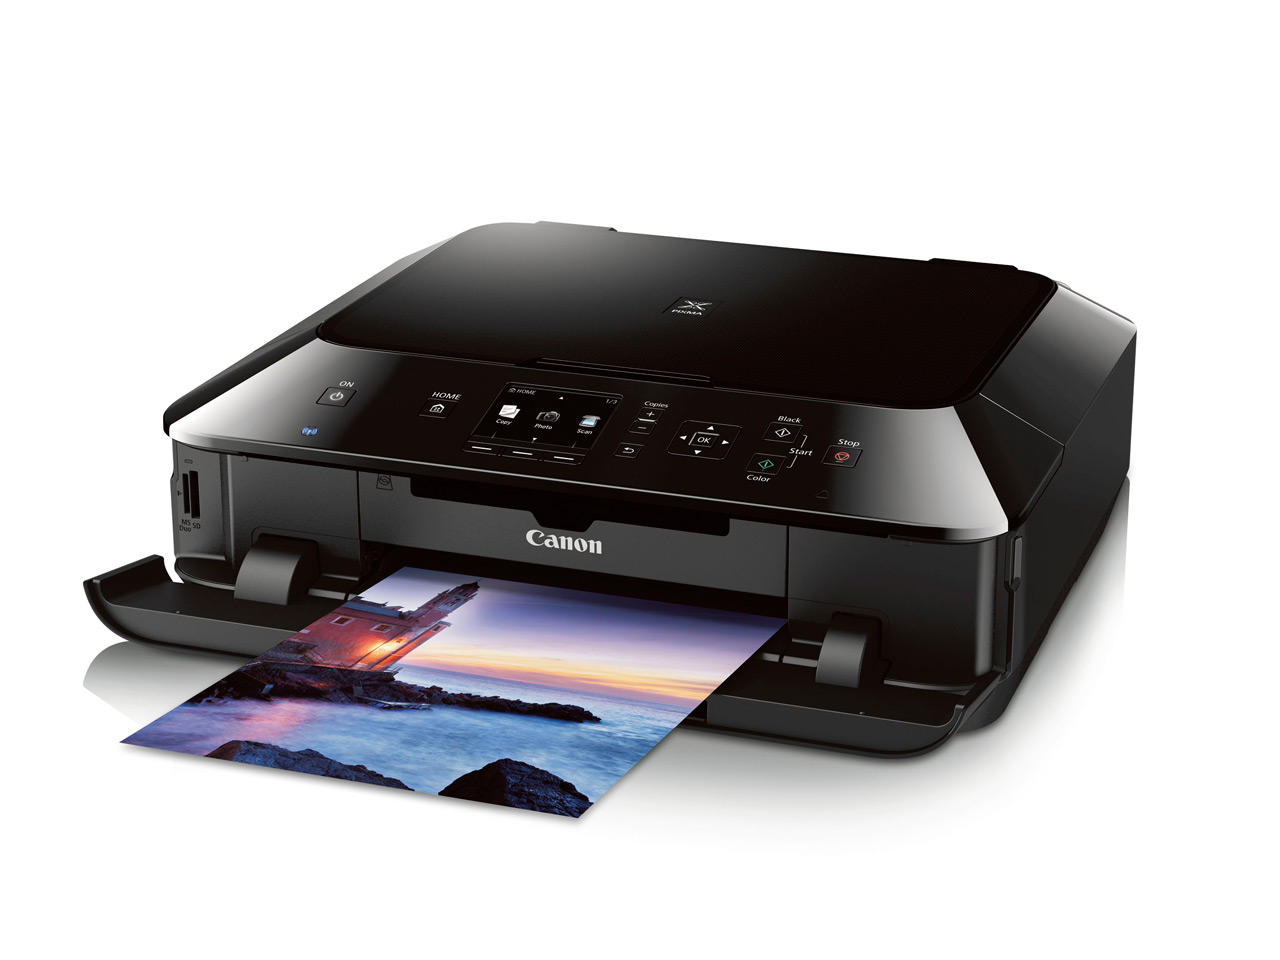 Canon Unveils PIXMA MG6320, MG5420 and iP7220 Printer and CanoScan